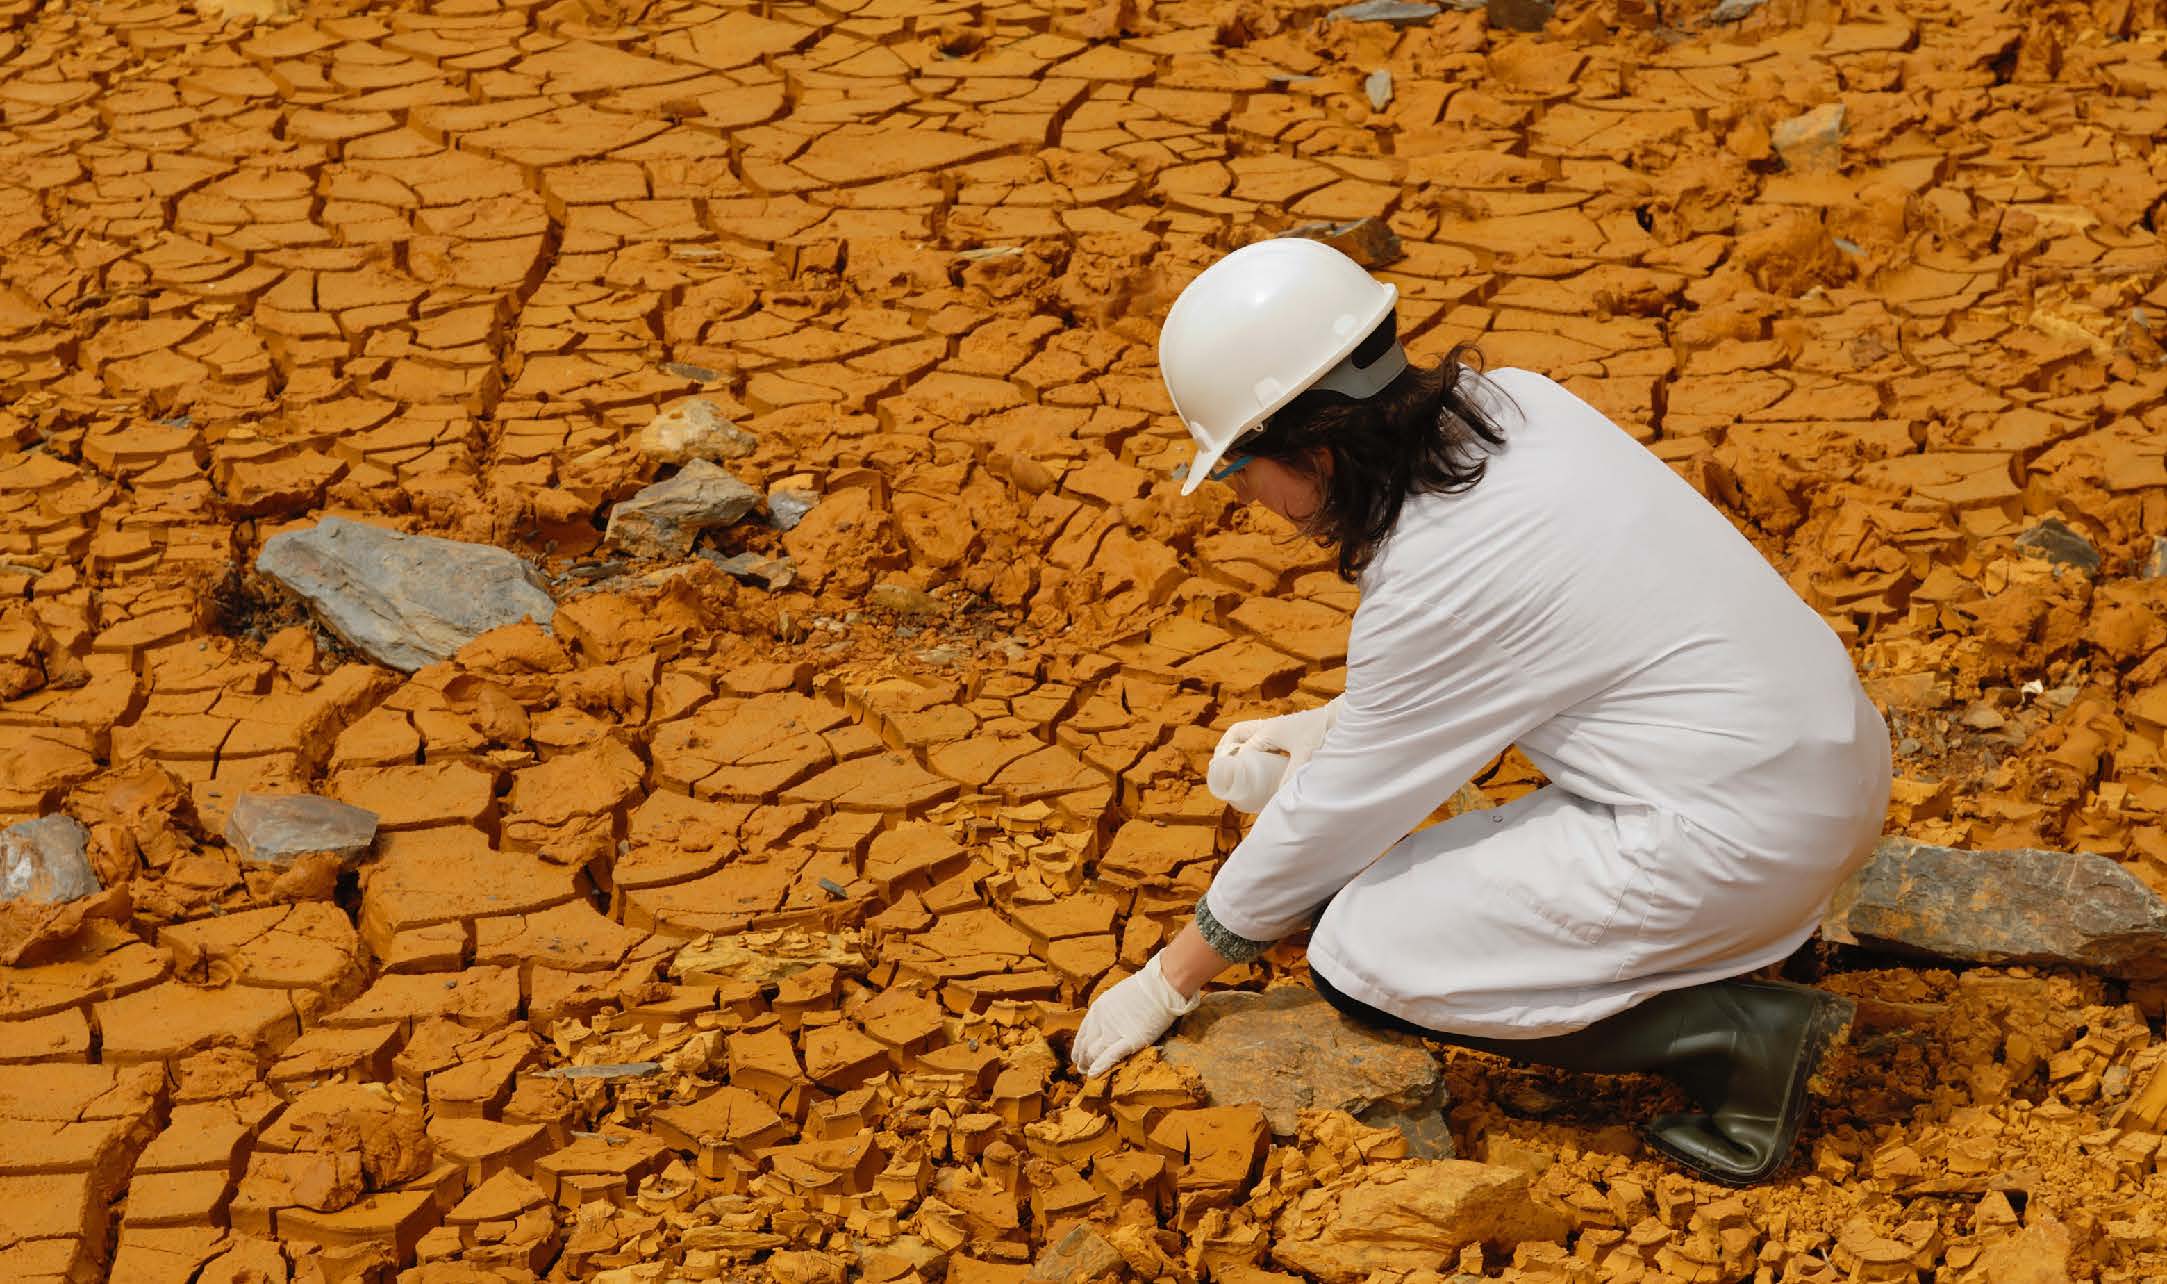 Female climate scientist collecting soil samples in a dry, arrid desert with cracked orange dirt.